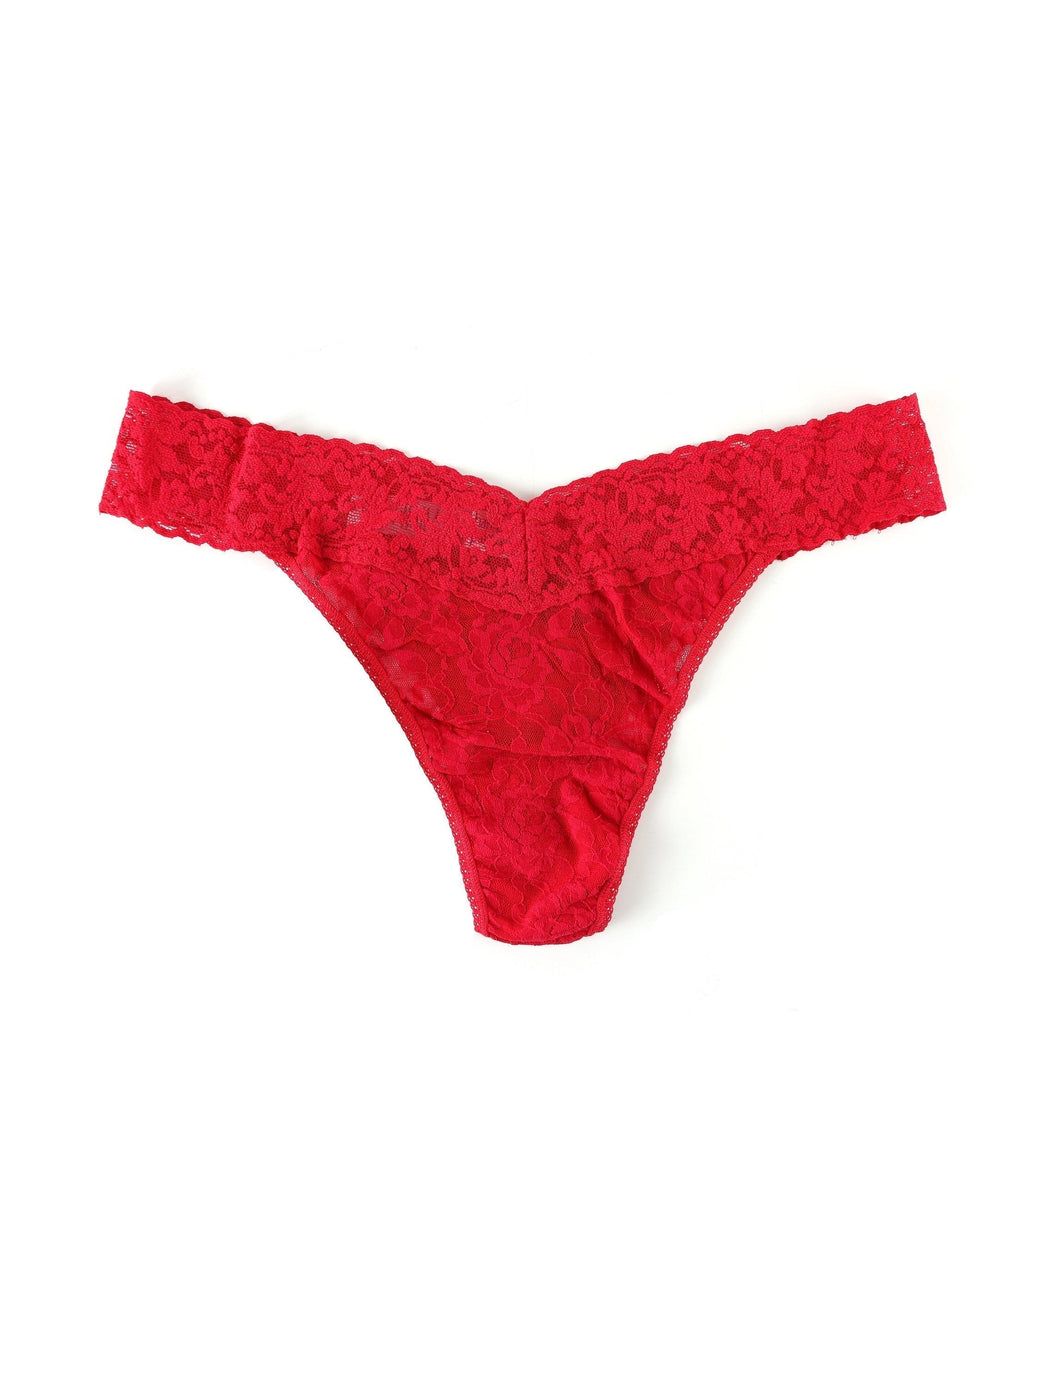 Plus Size Signature Lace Original Rise Thong-RED-Hanky Panky